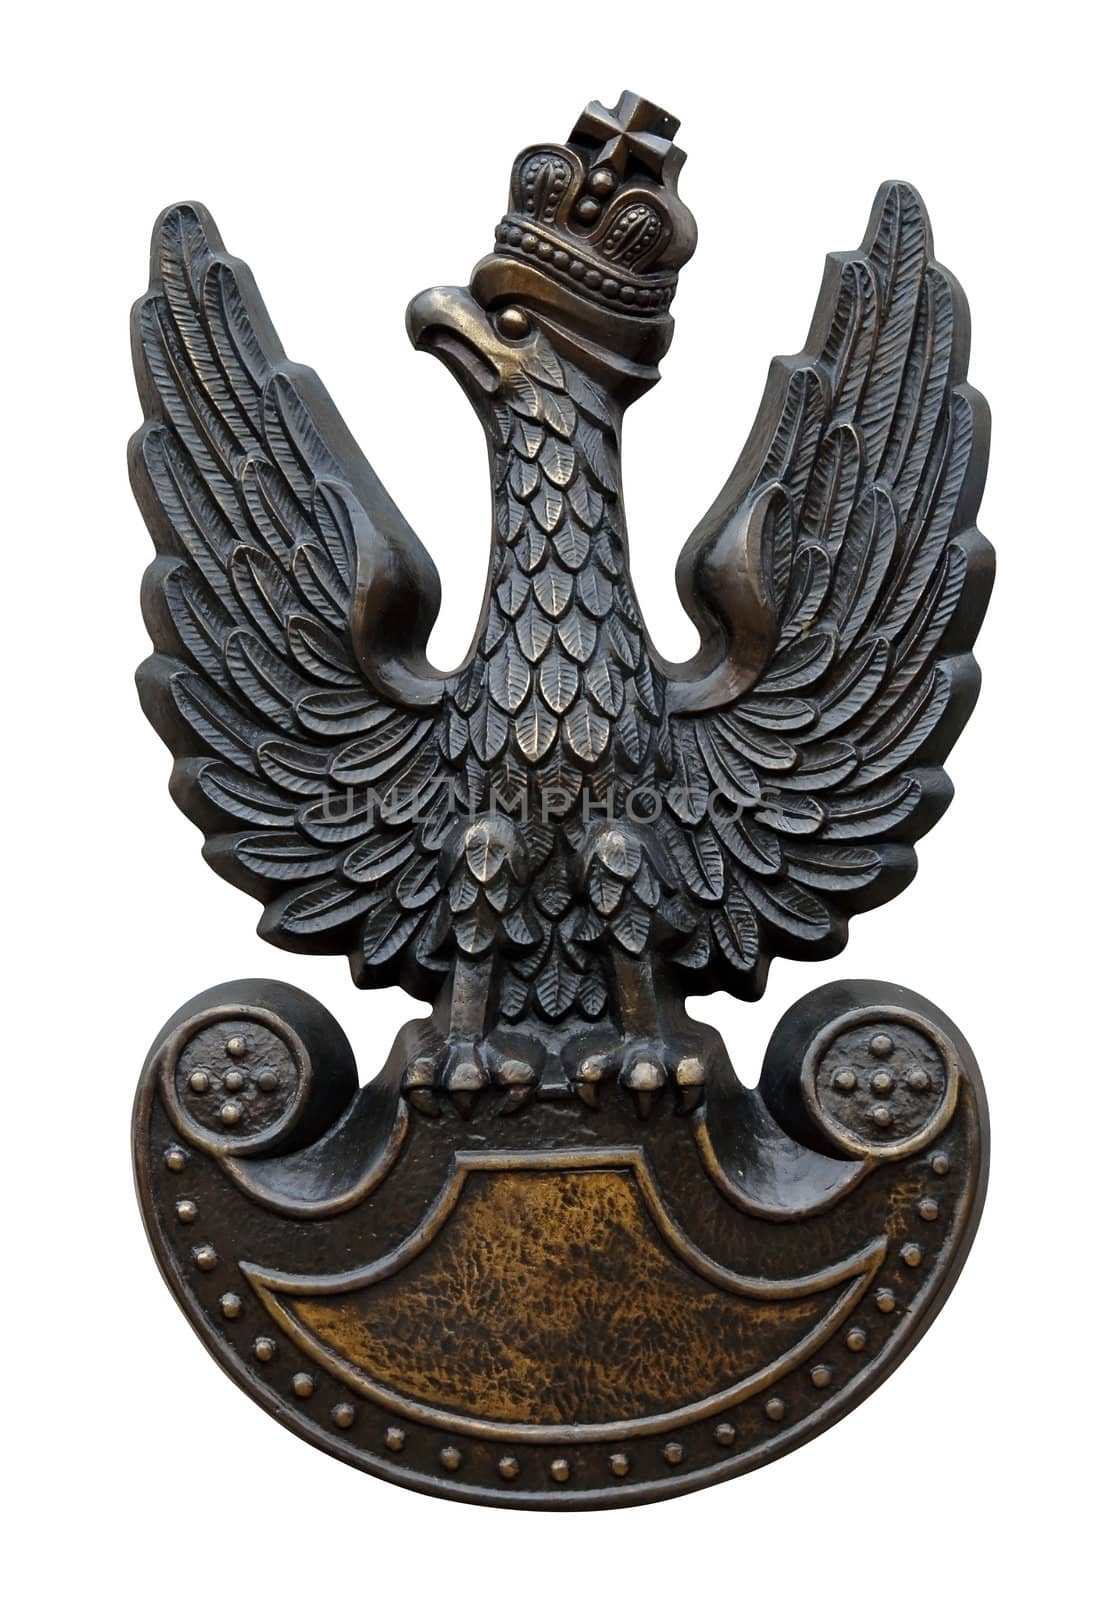 Polish Army Symbolic Eagle insignia from Museum of Polish Army in Warsaw.